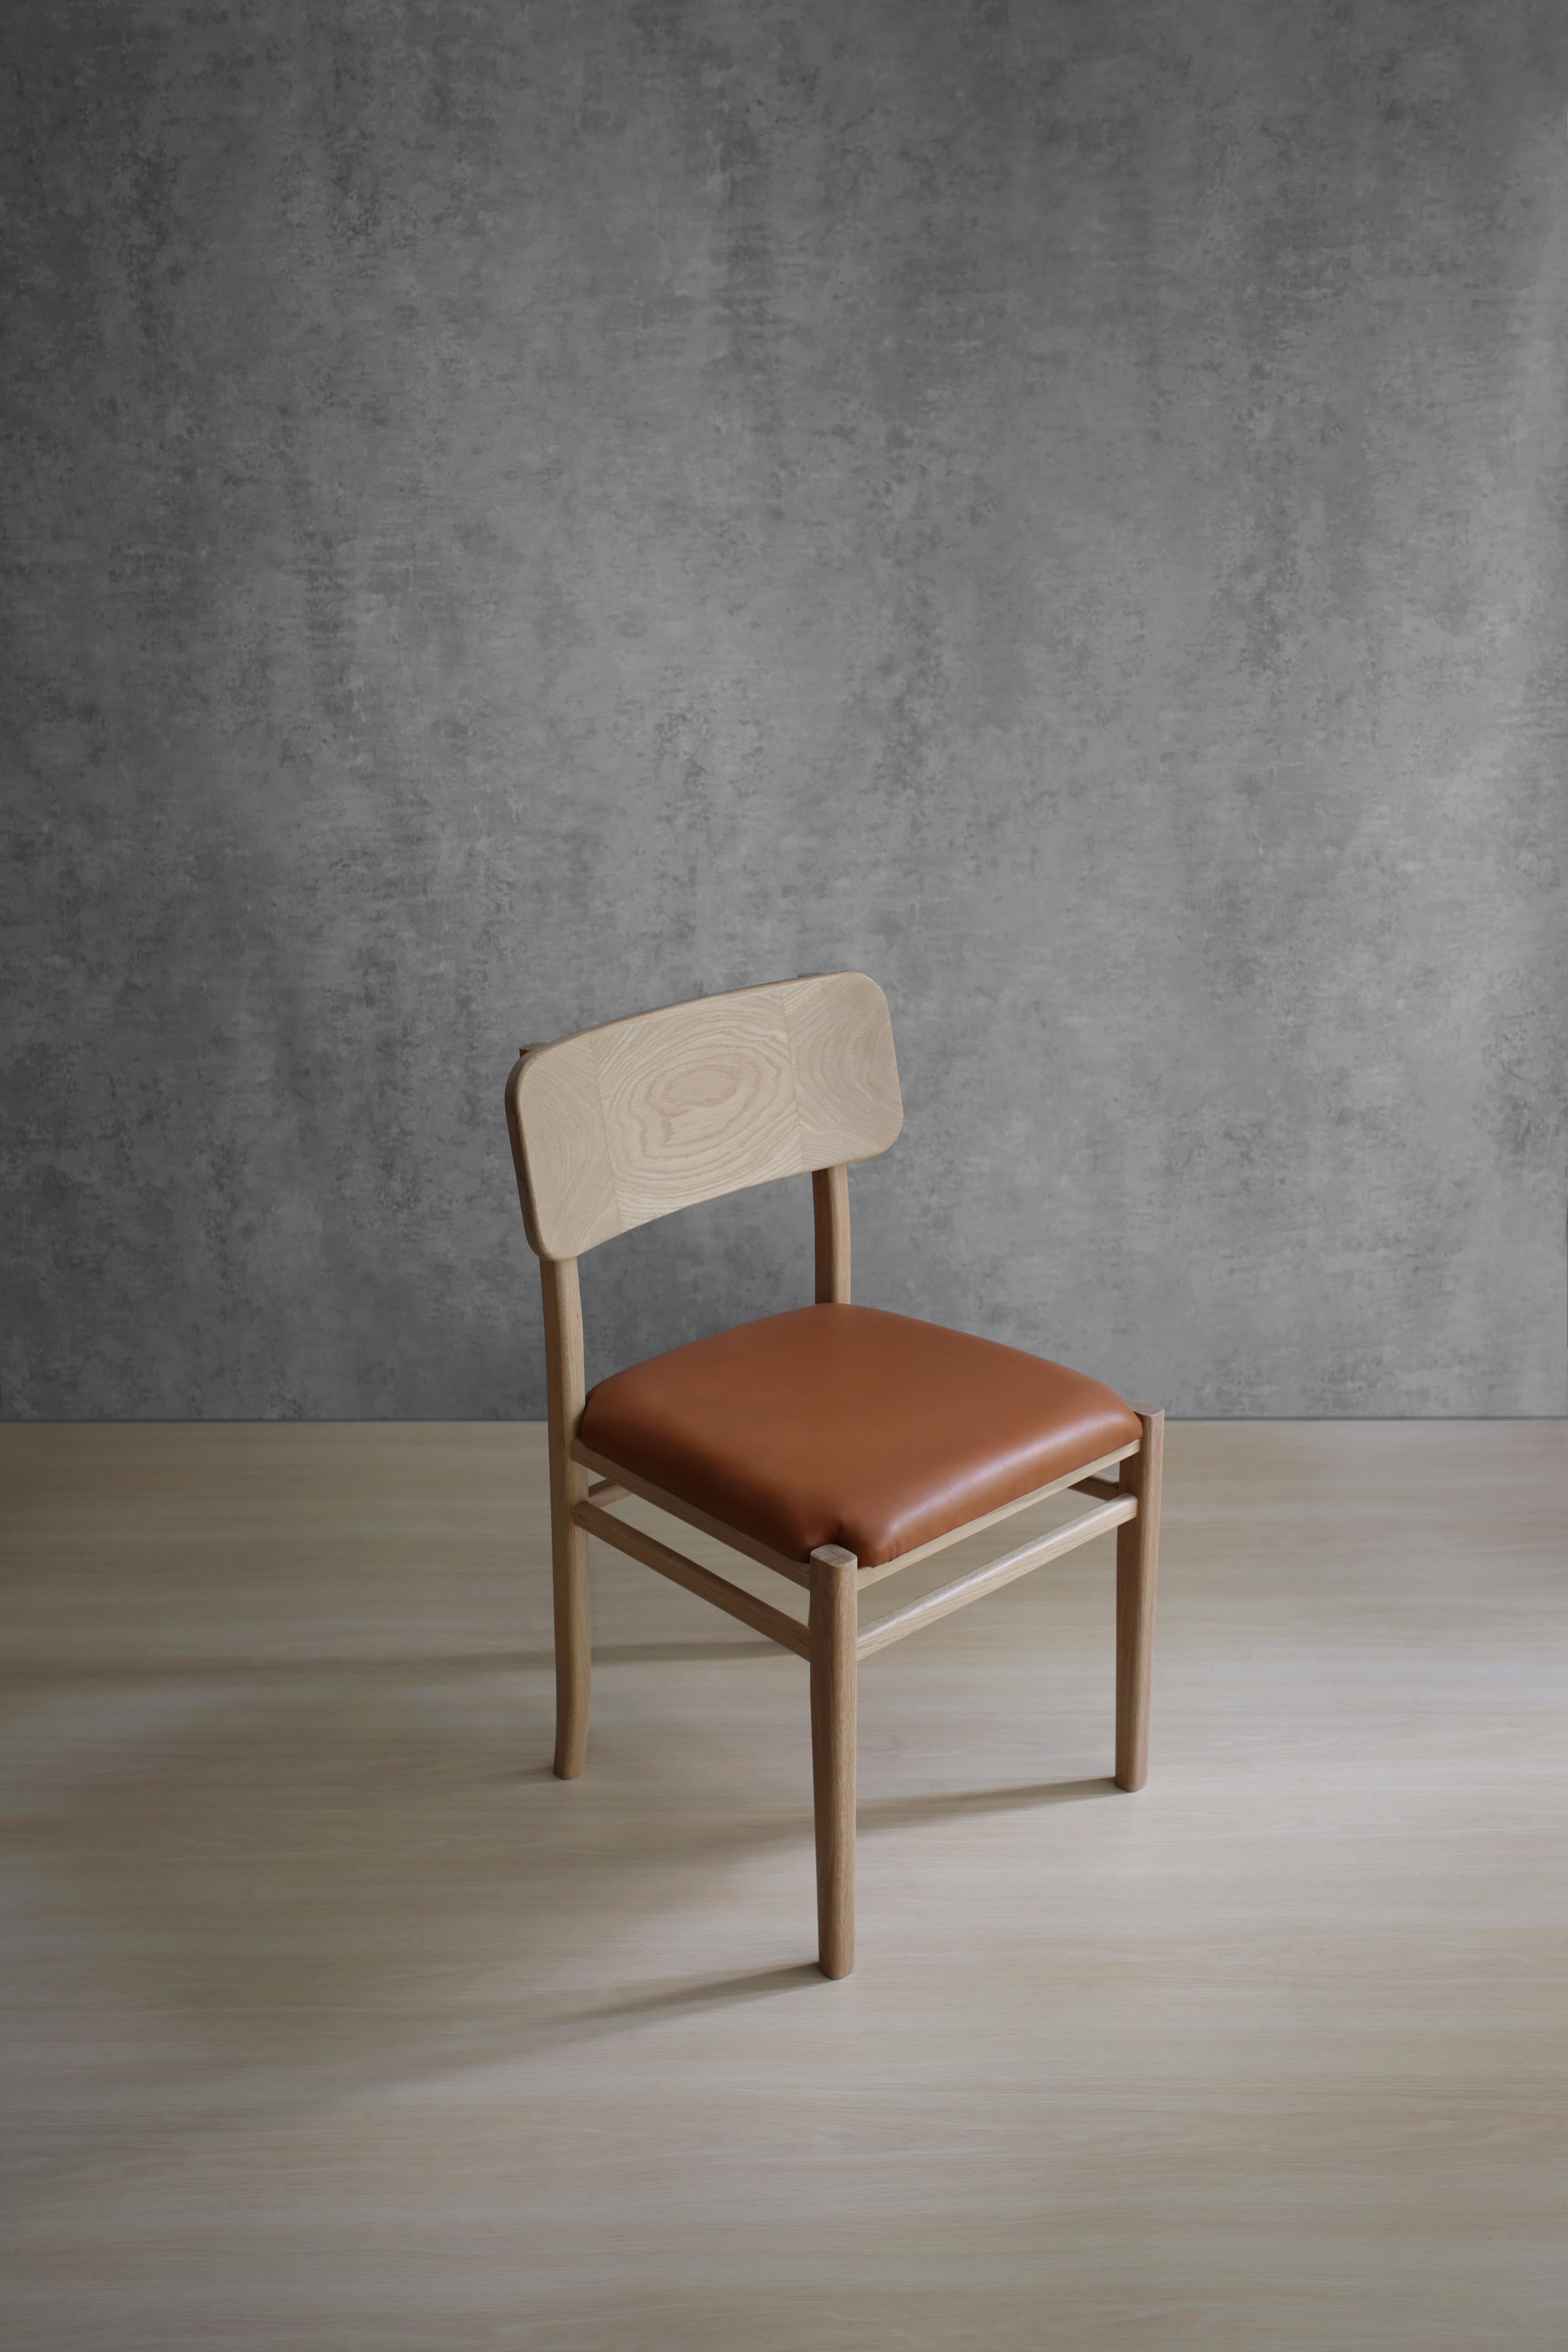 Mexican Noviembre X Dining Chair in Oak Wood with Leather Seat by Joel Escalona